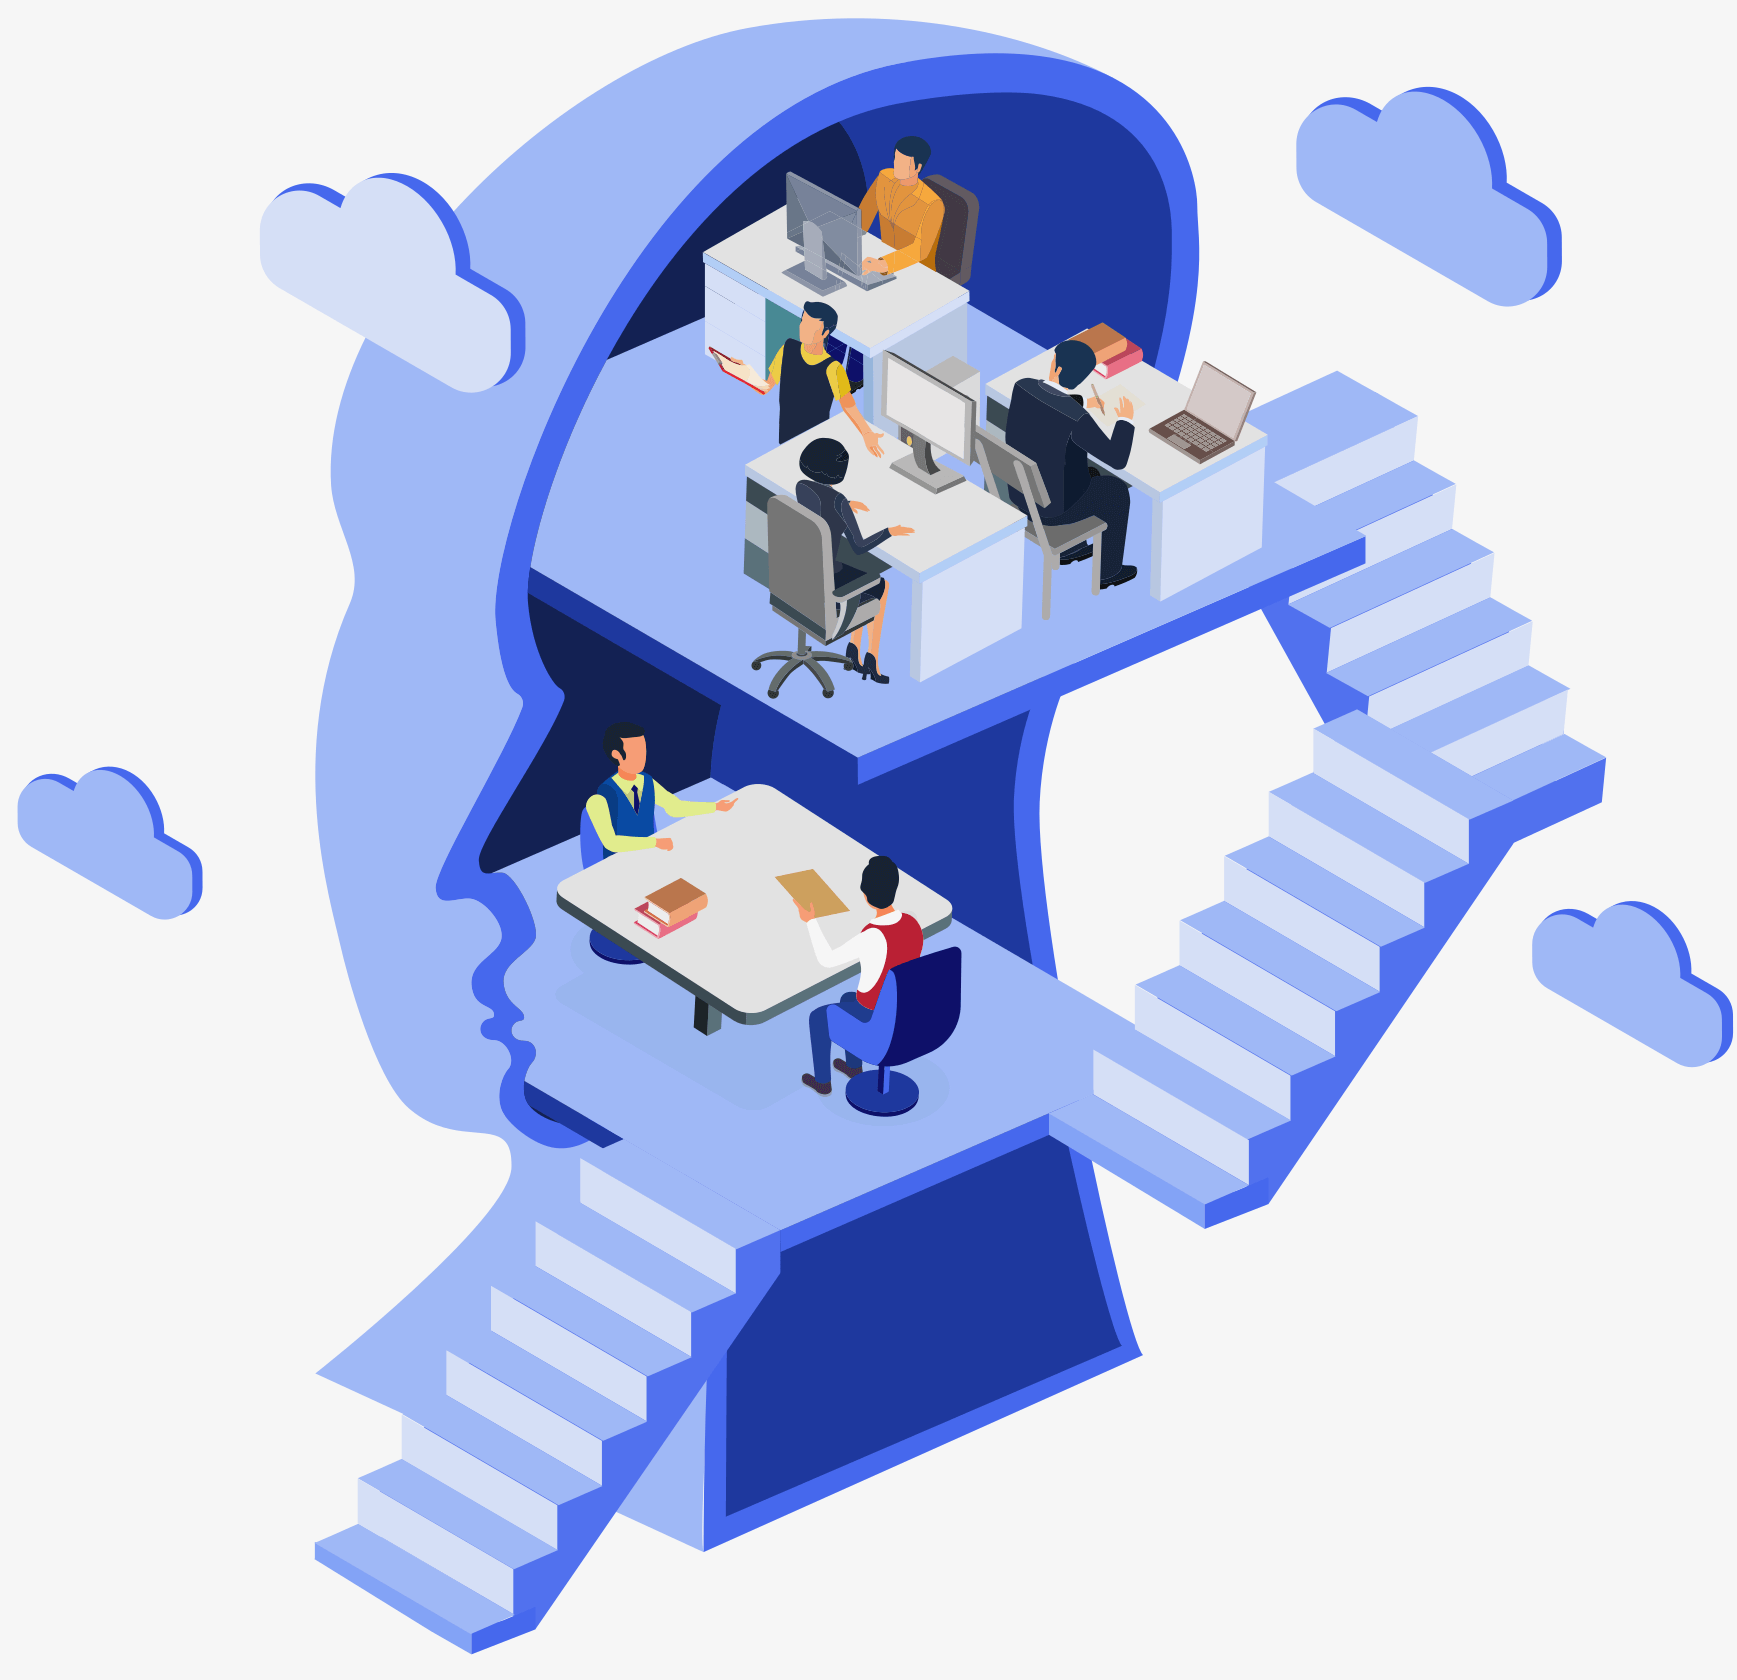 illustration containing people working together to representing the comply solution